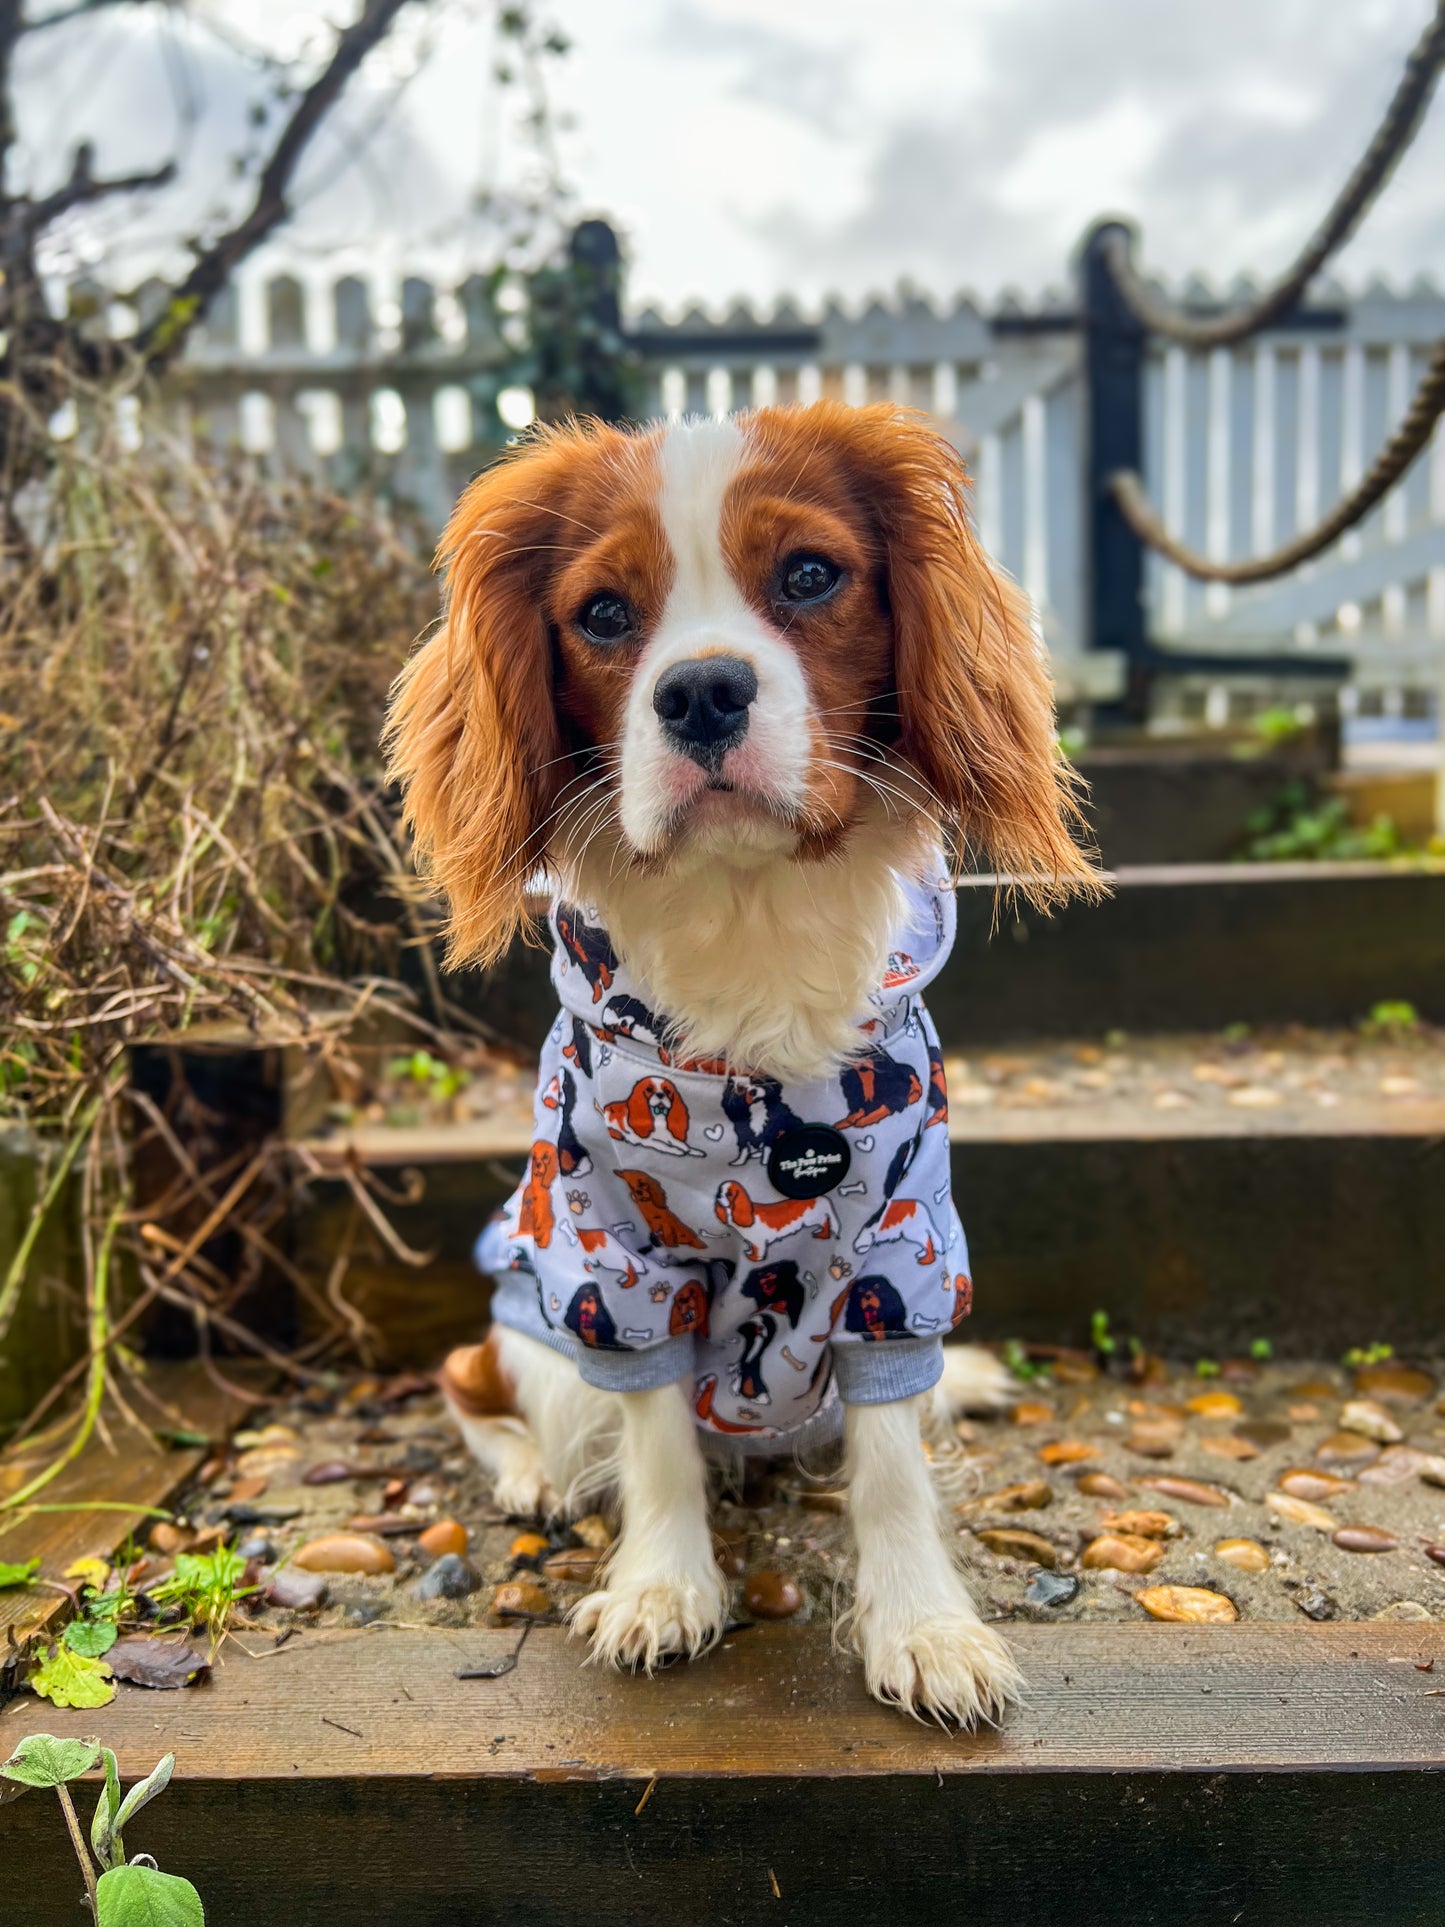 The Cavalier Dog Hoodie - All Over Print